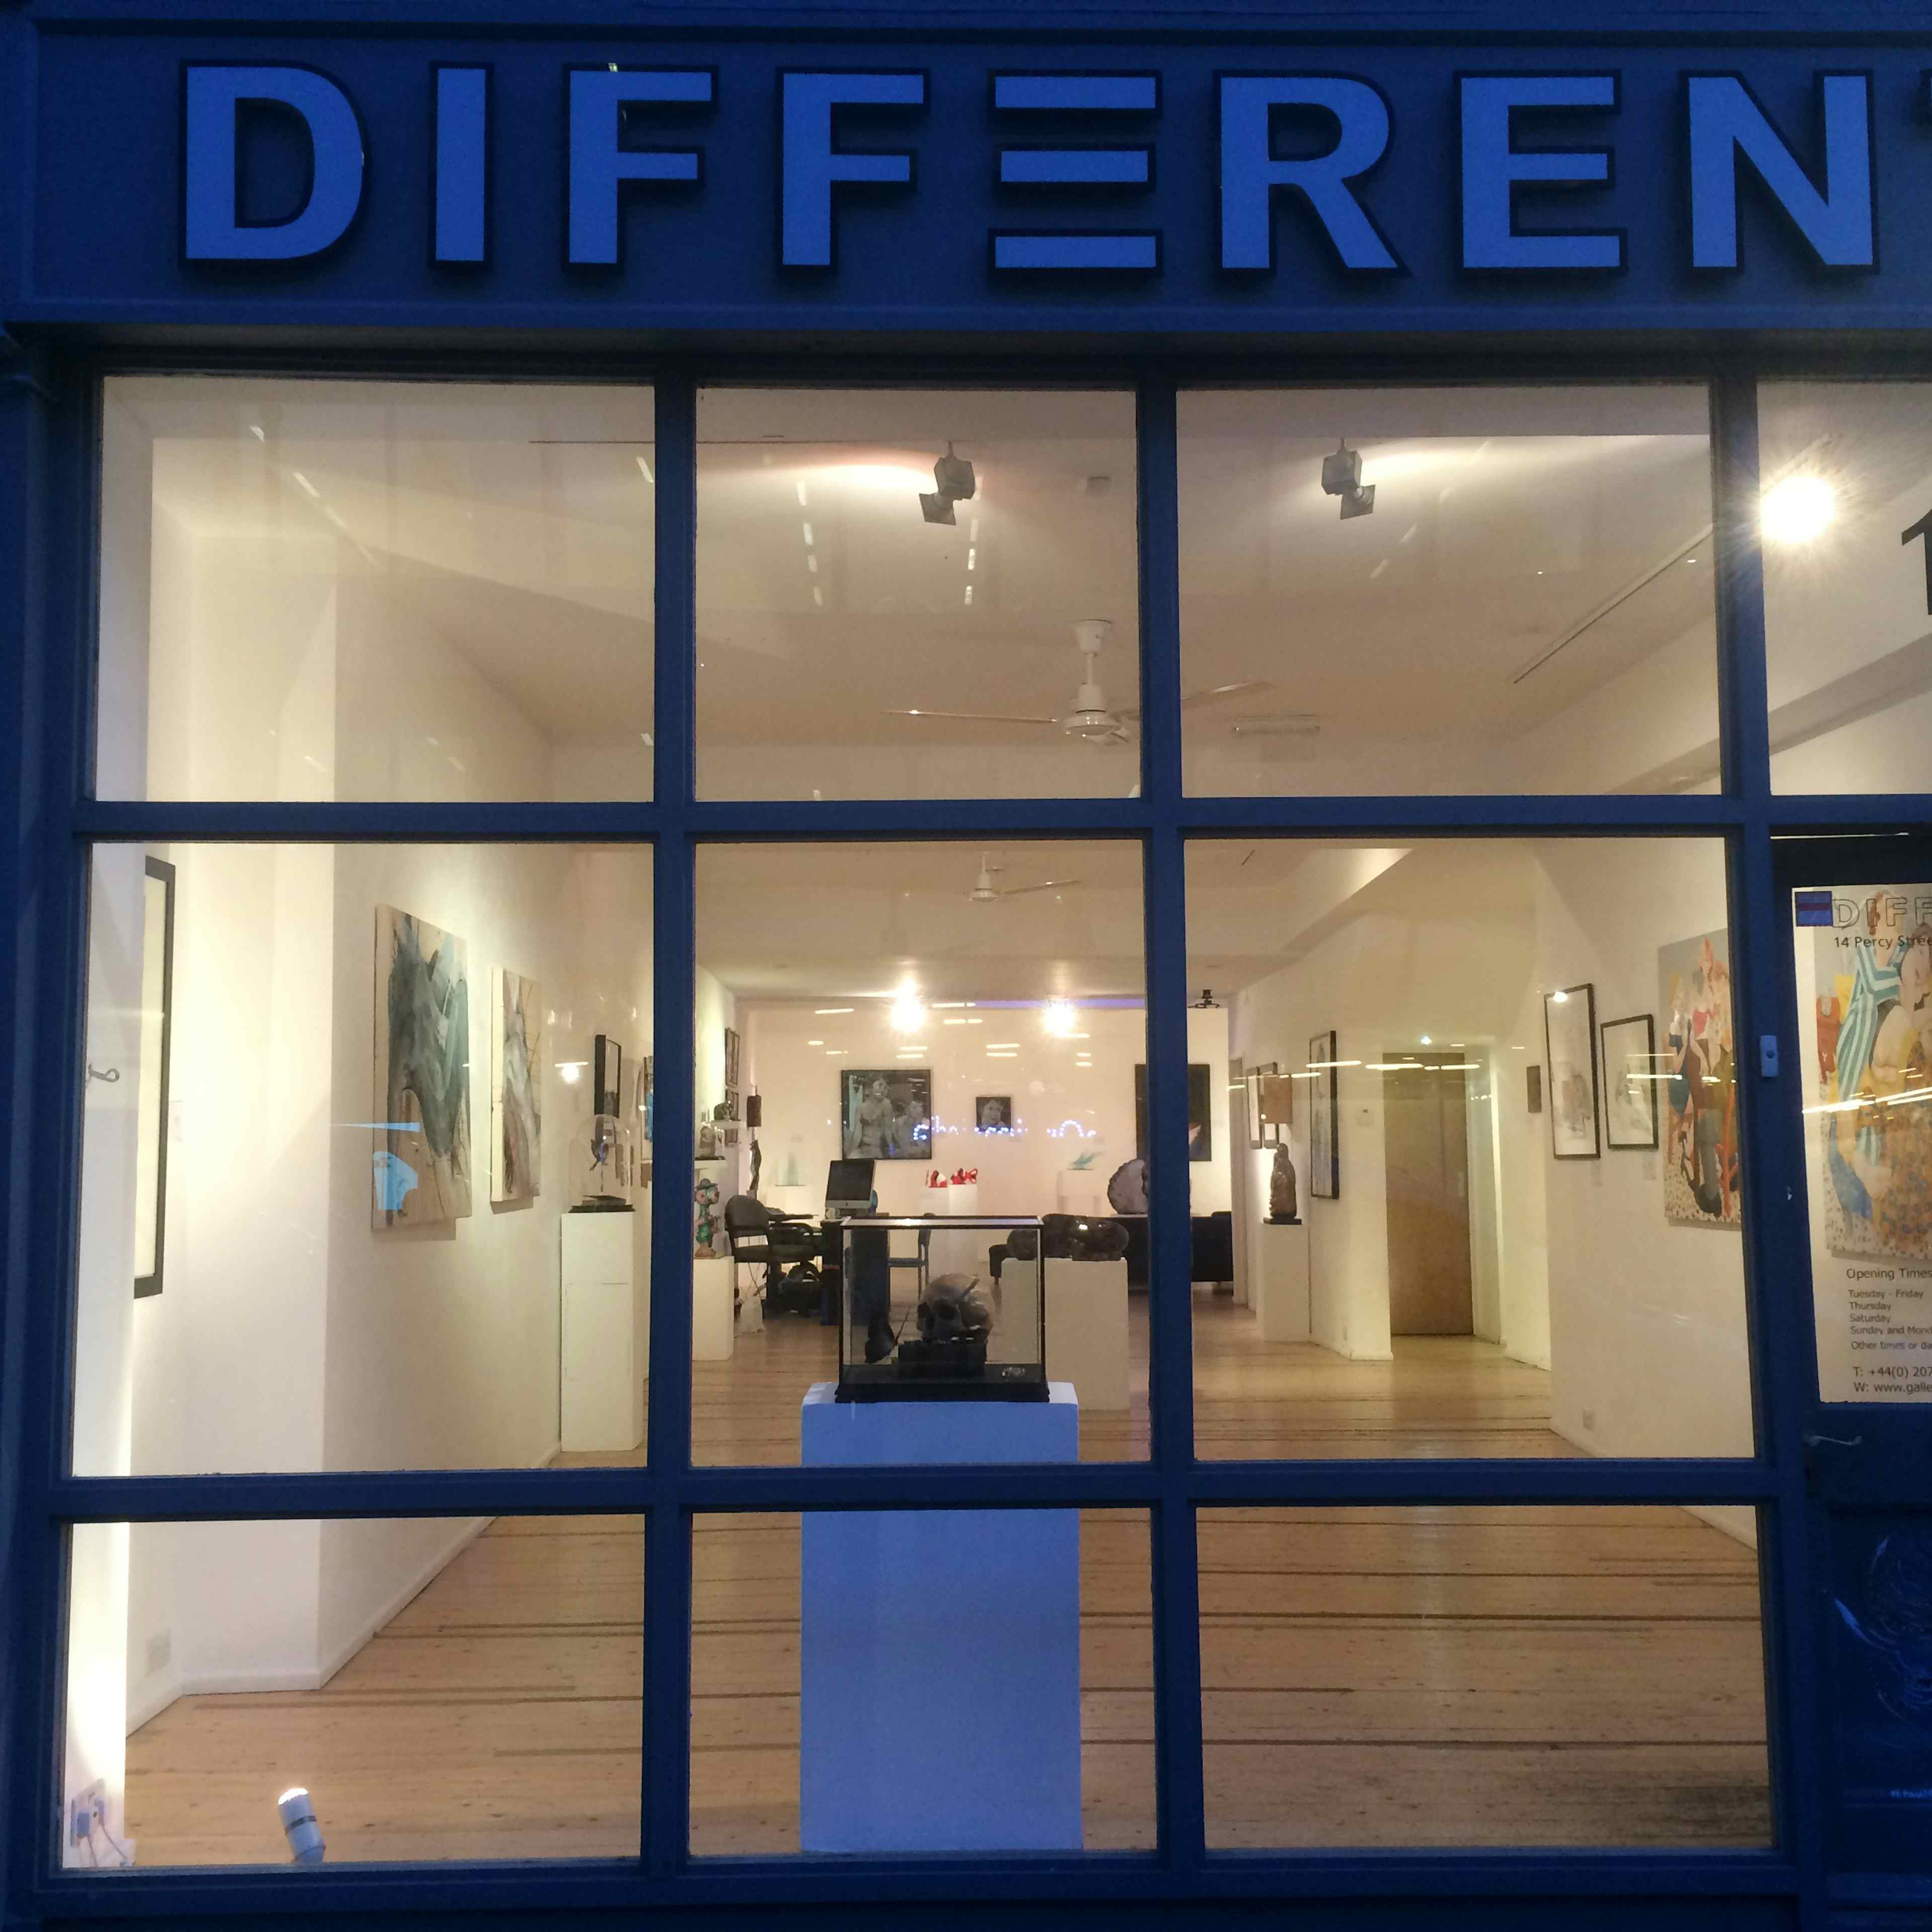 Gallery Different - image 2